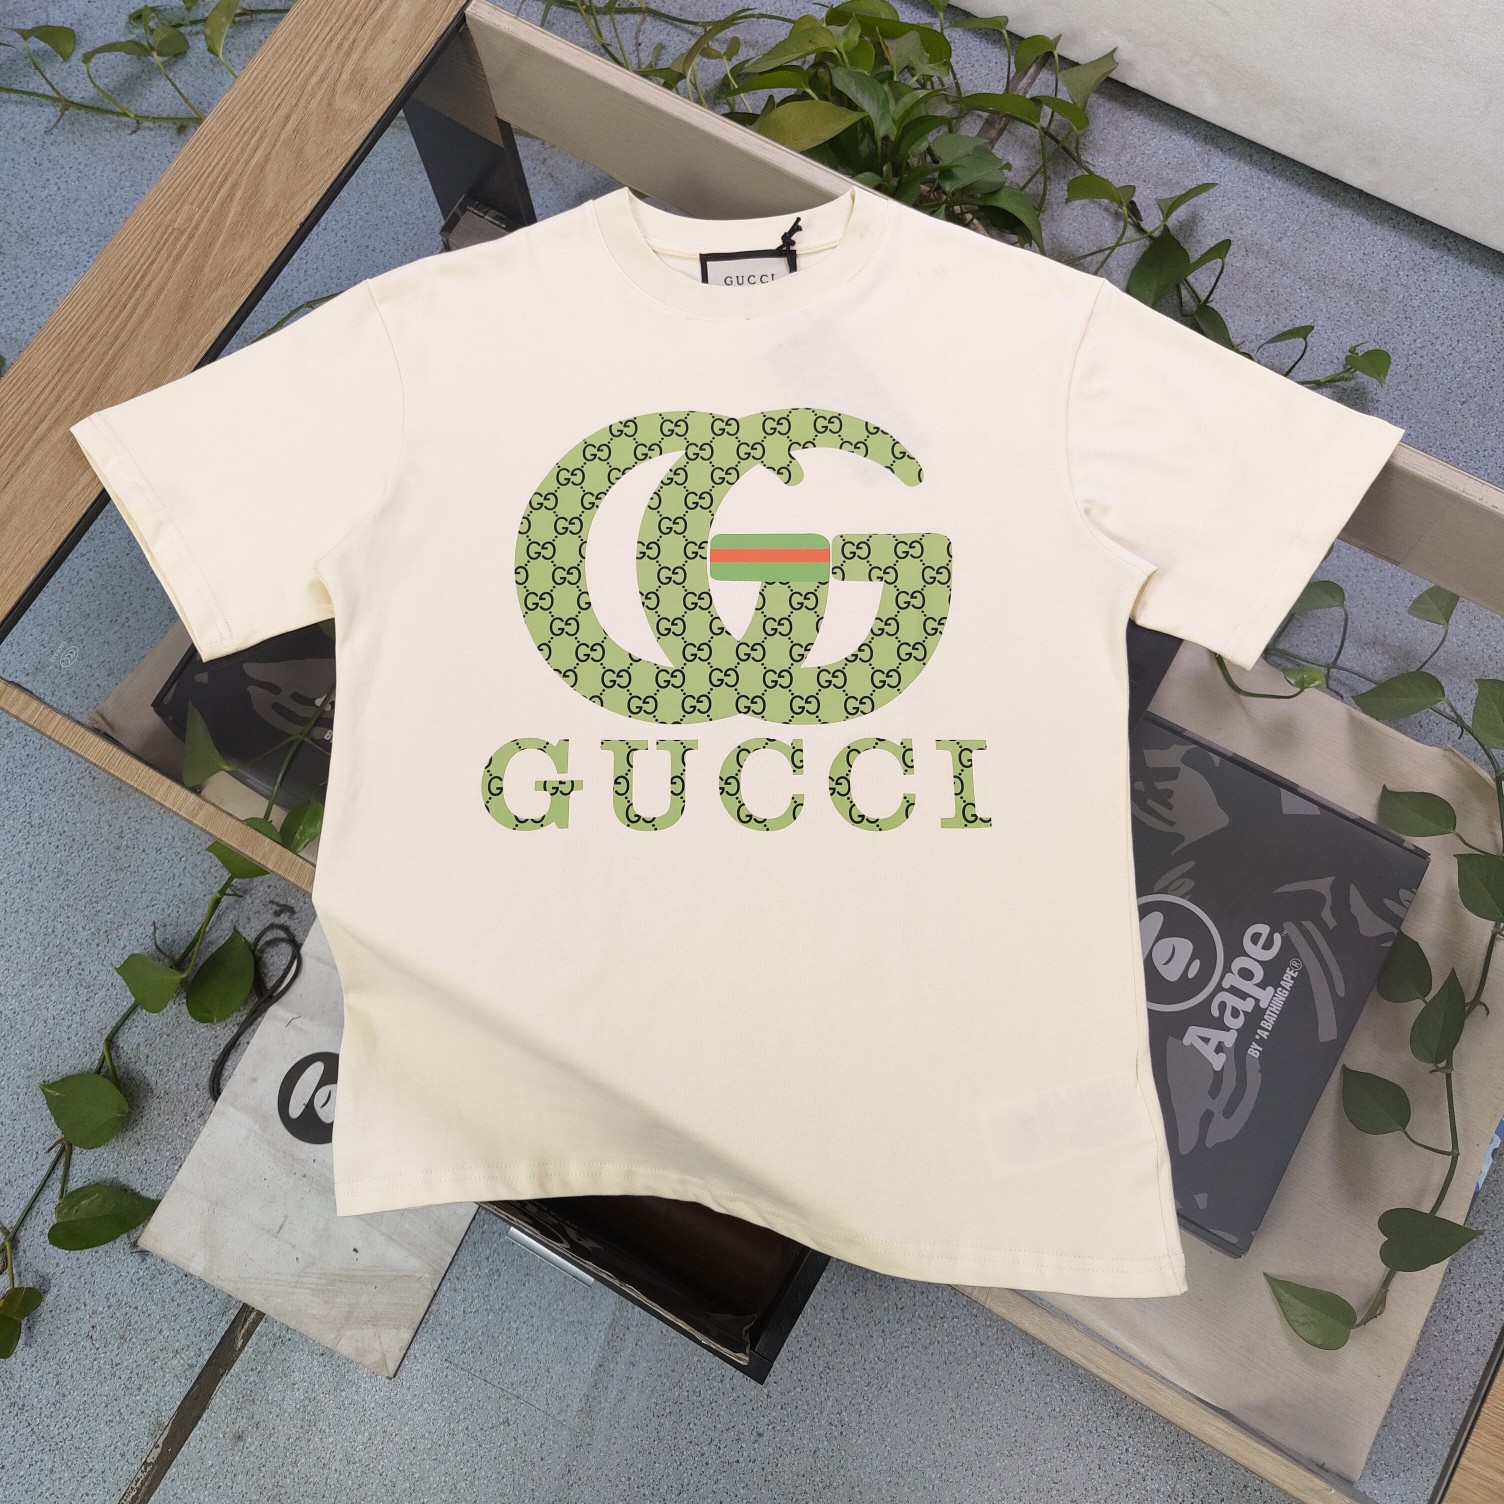 Gucci Clothing T-Shirt Apricot Color Black Green Printing Unisex Cotton Spring/Summer Collection Short Sleeve XD99117